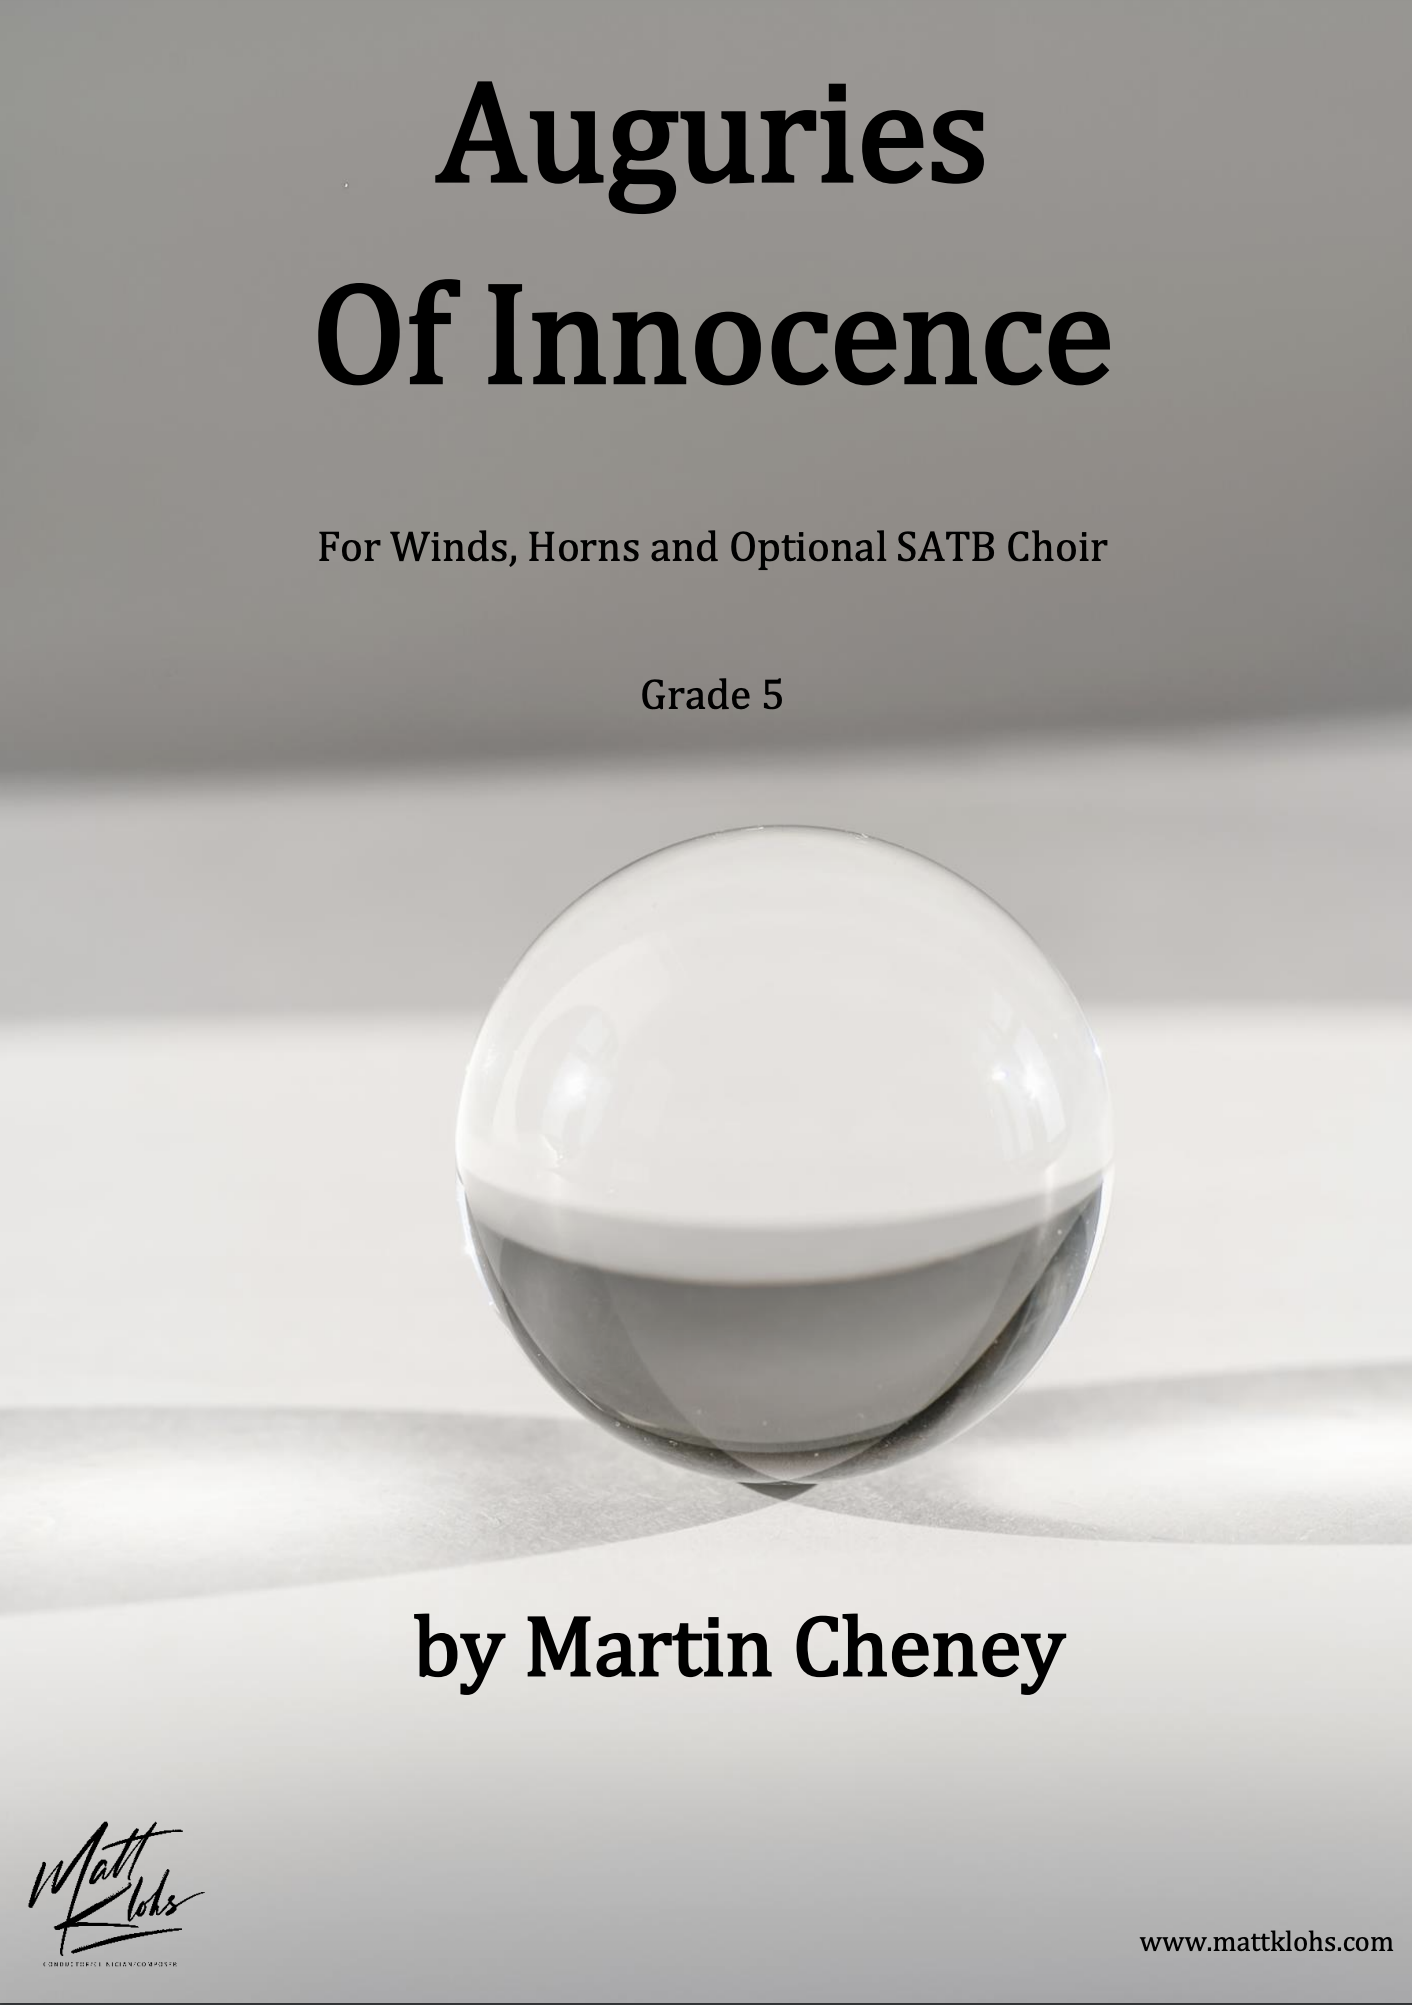 Auguries Of Innocence by Martin Cheney